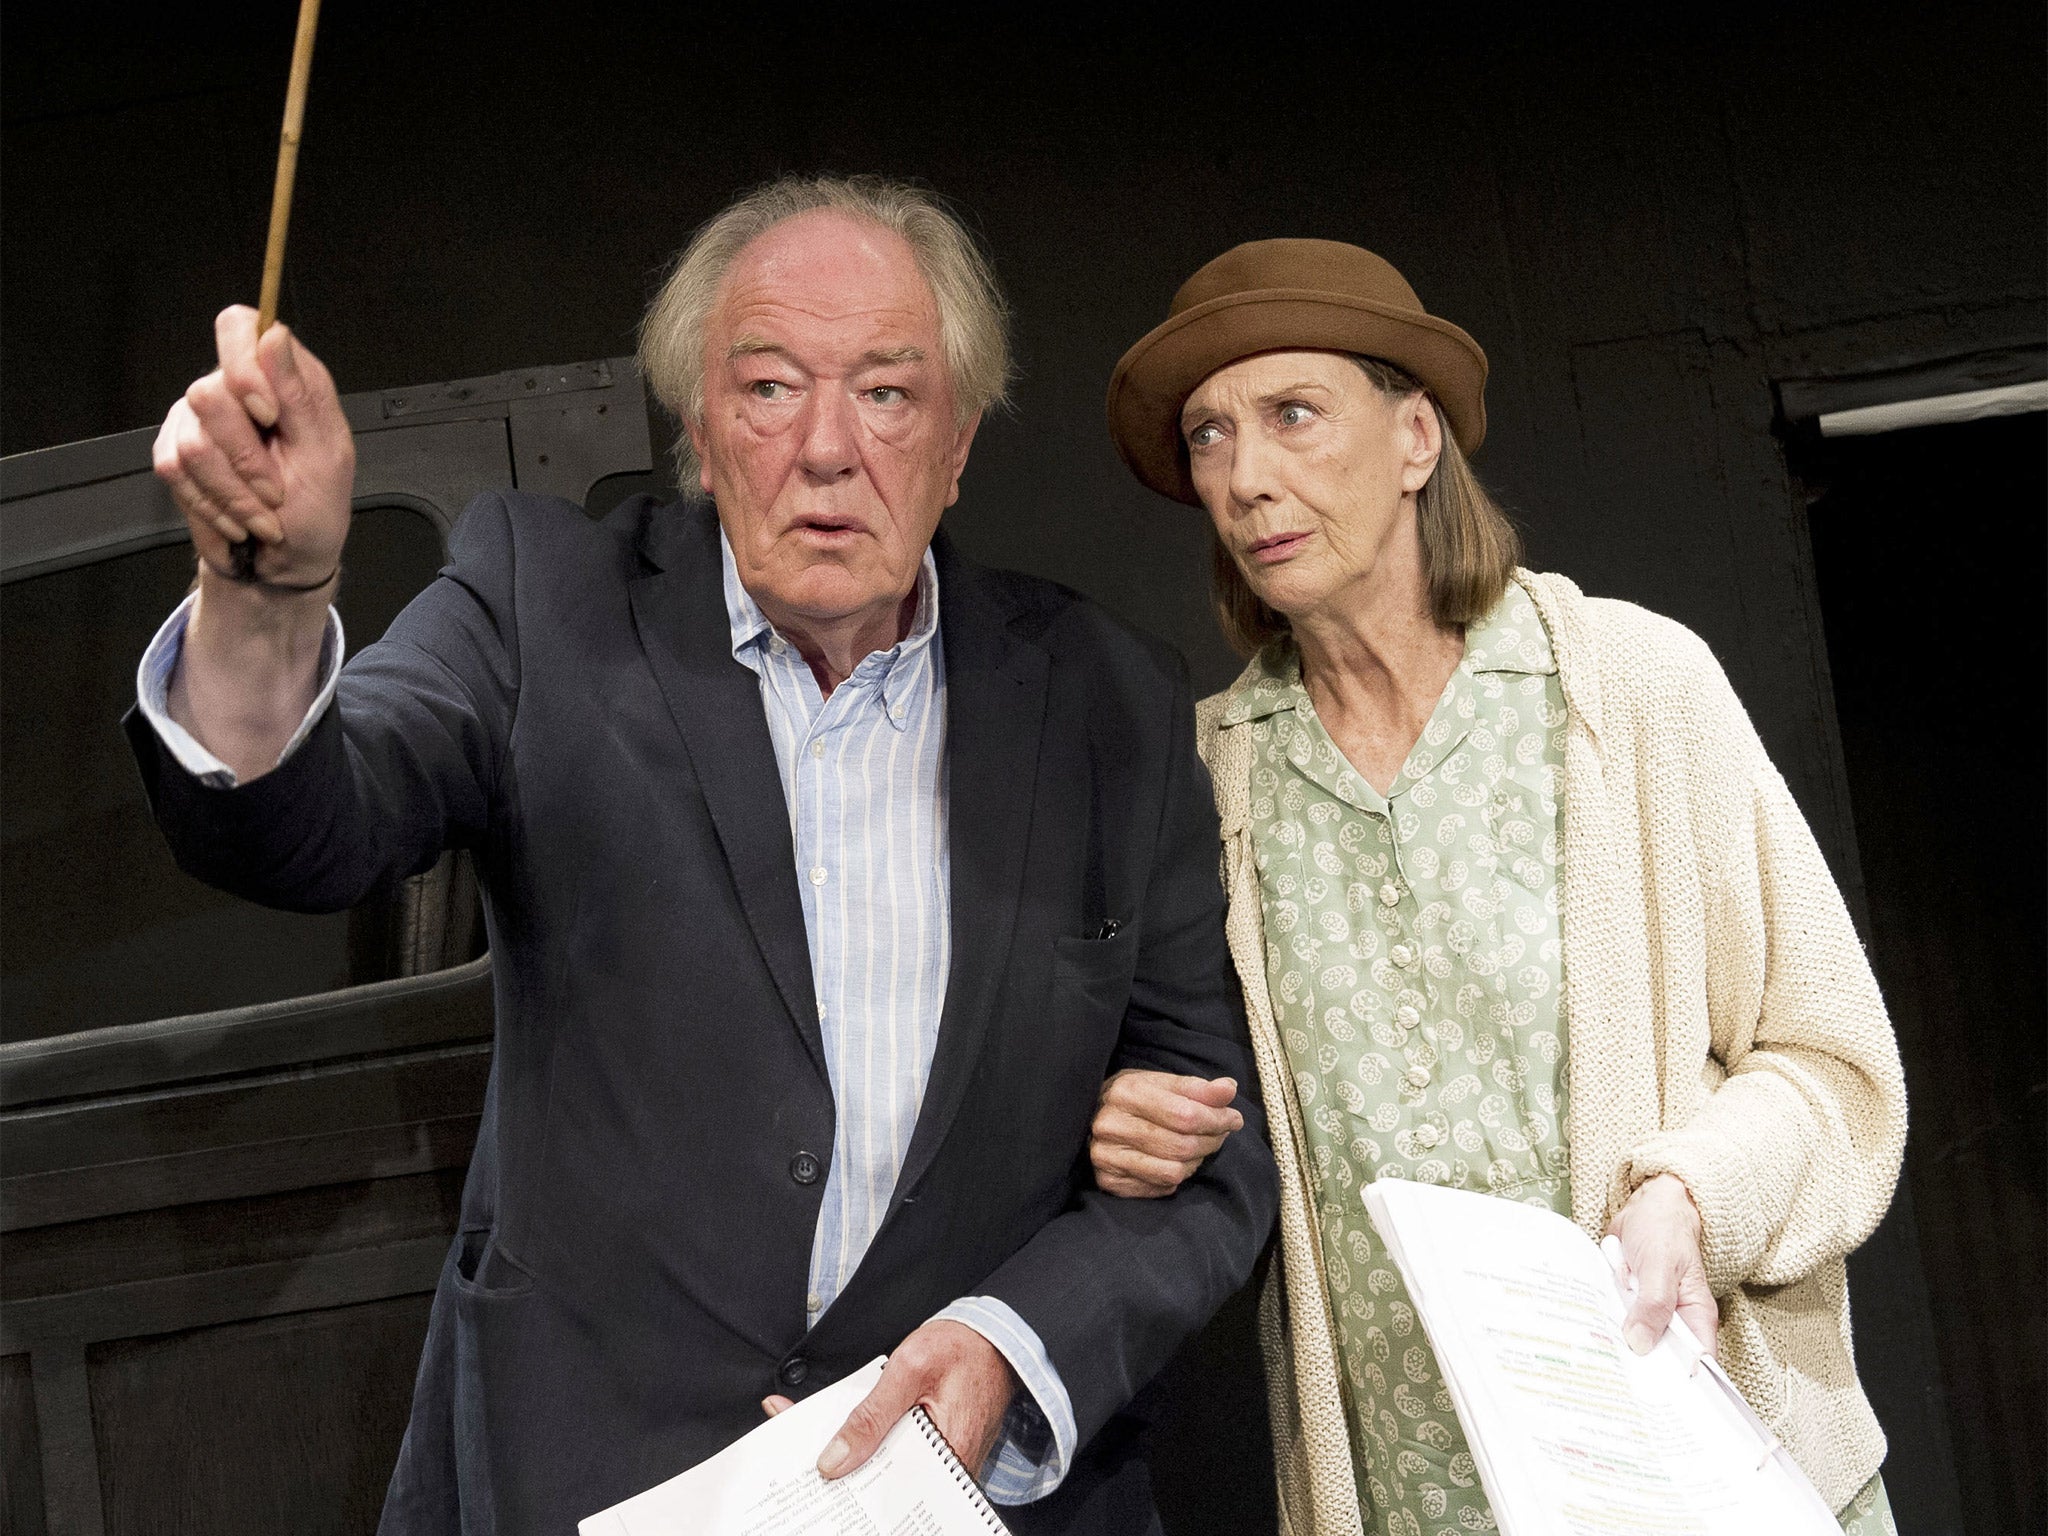 Michael Gambon and Dame Eileen Atkins in Beckett’s ‘All That Fall’ at London’s Jermyn Street Theatre in 2012 